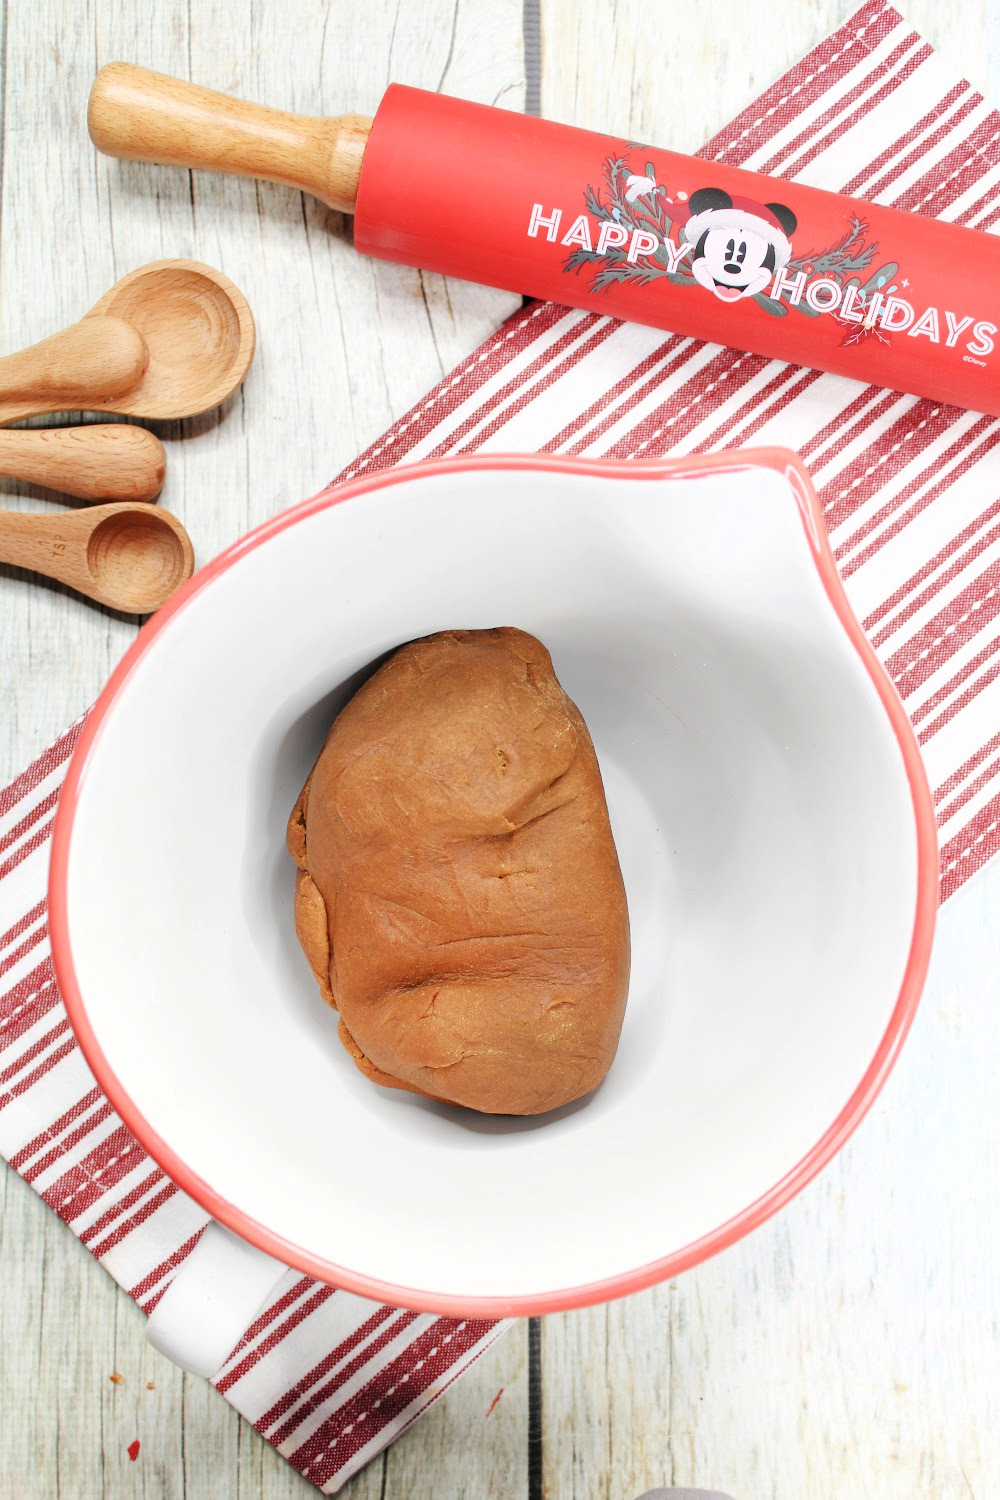 Cover the bowl of gingerbread dough and place in the refrigerator for 30 minutes.